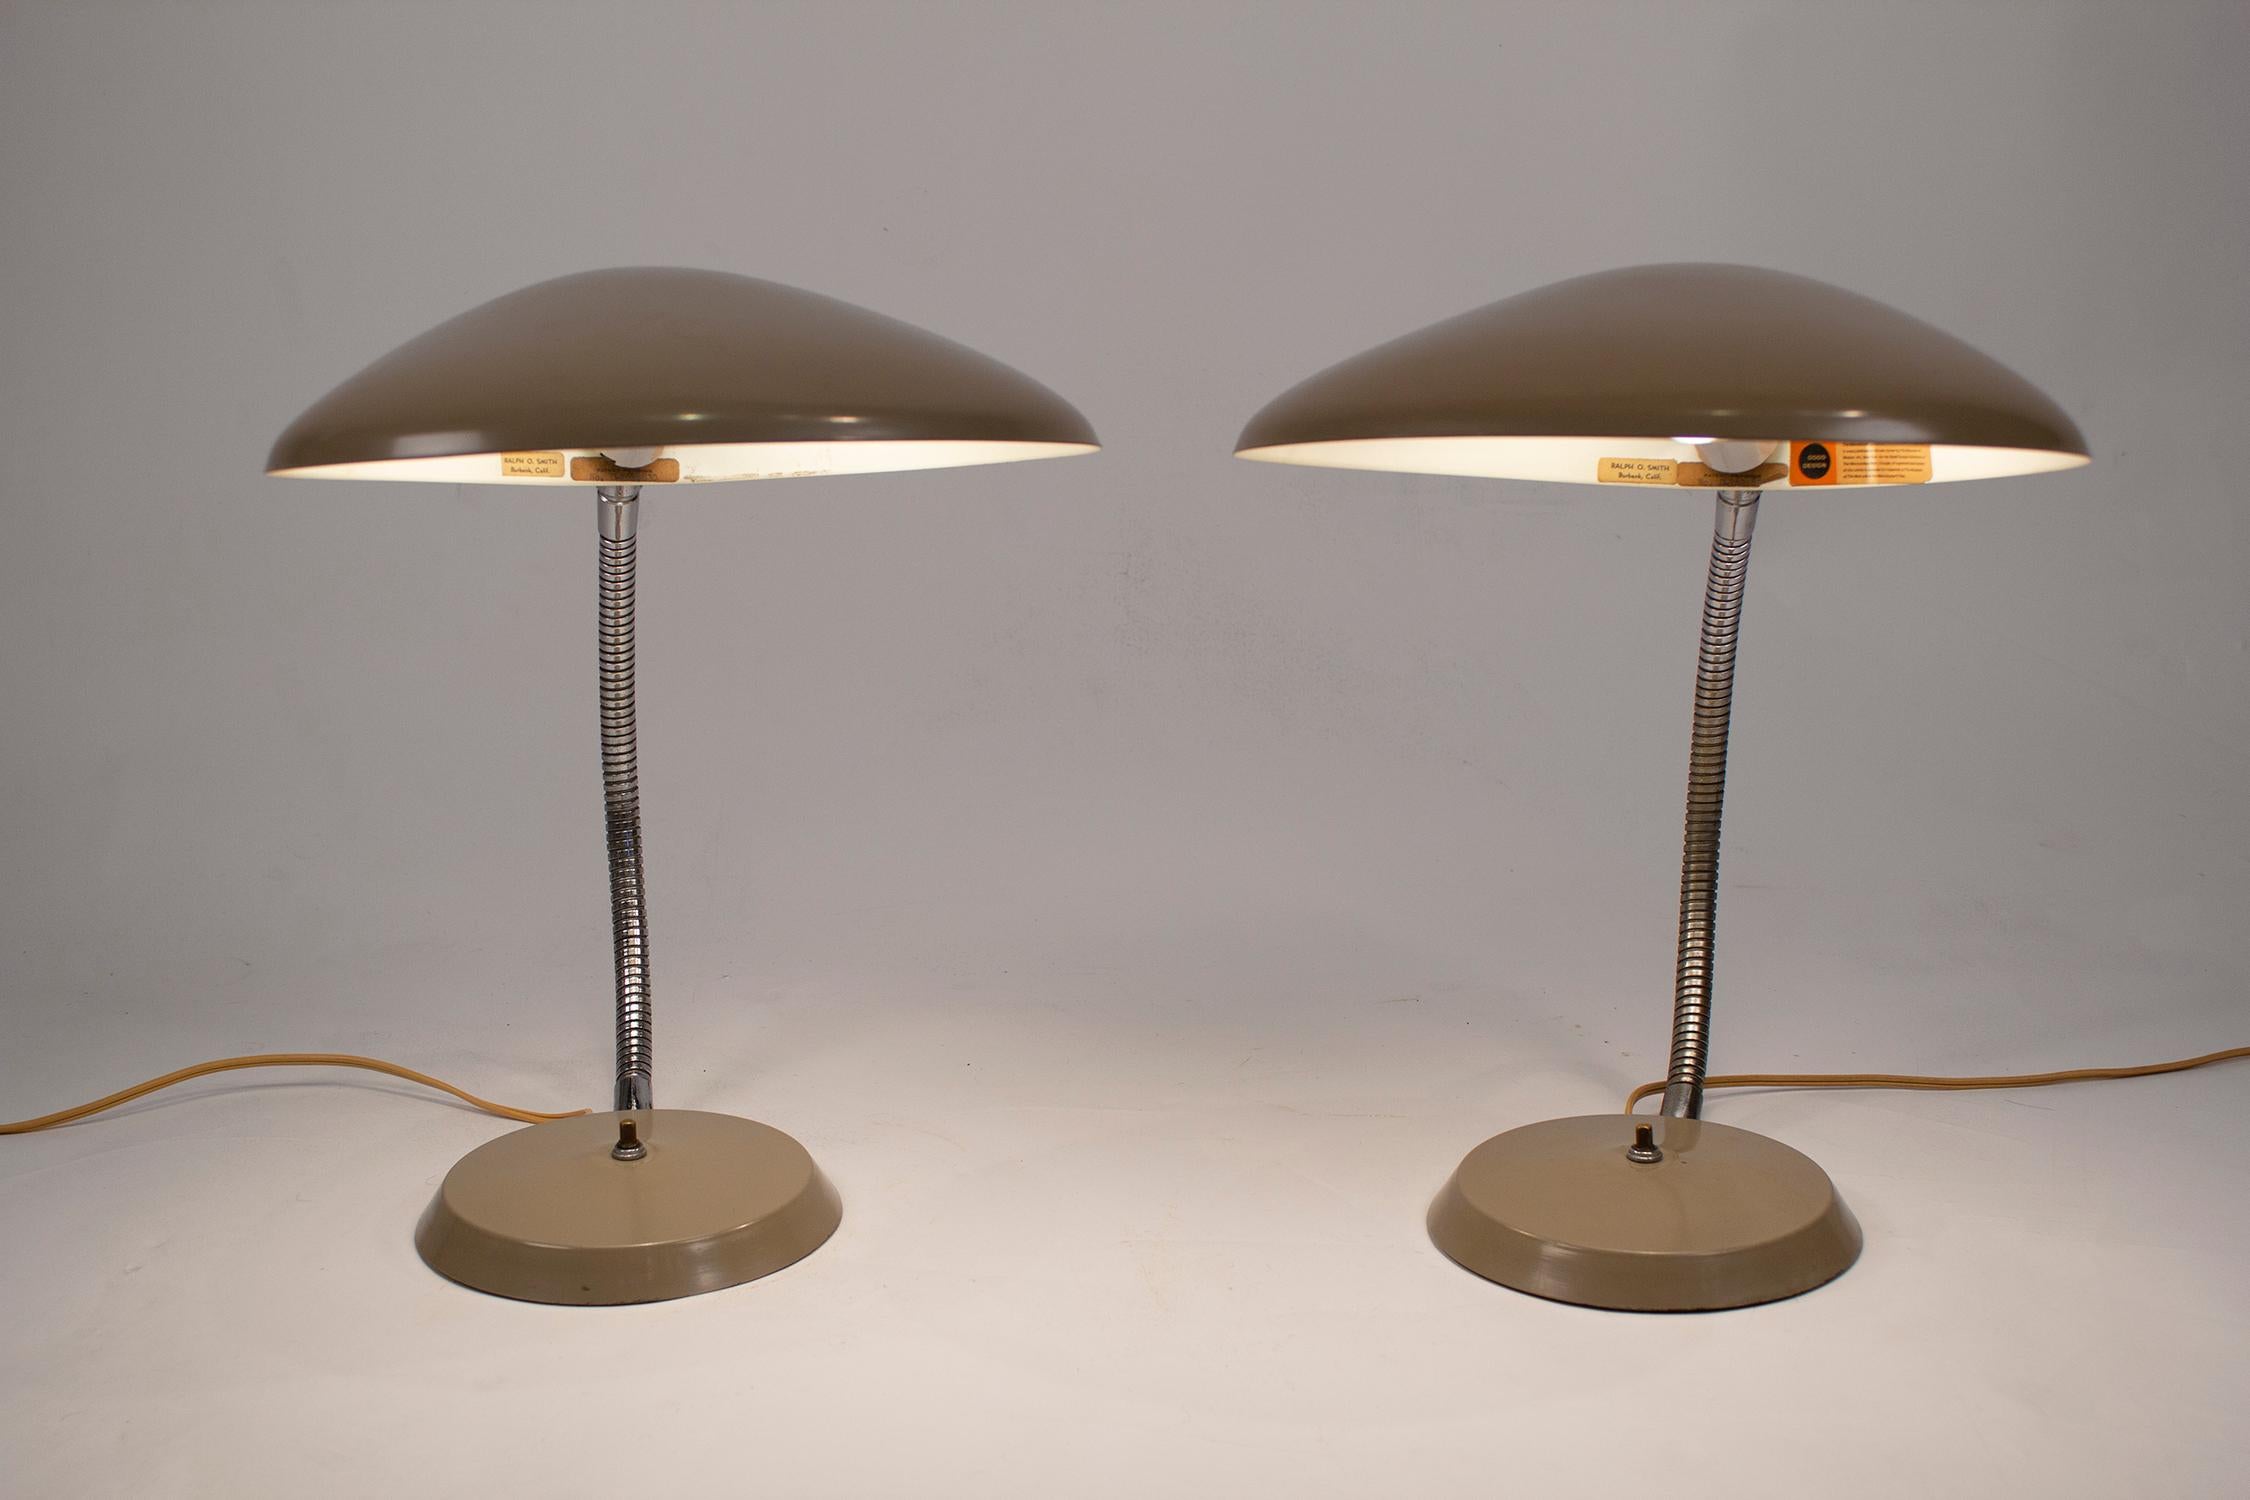 20th Century Grossman Cobra Lamp, Museum Quality Pair, Ralph O. Smith Labels Intact For Sale